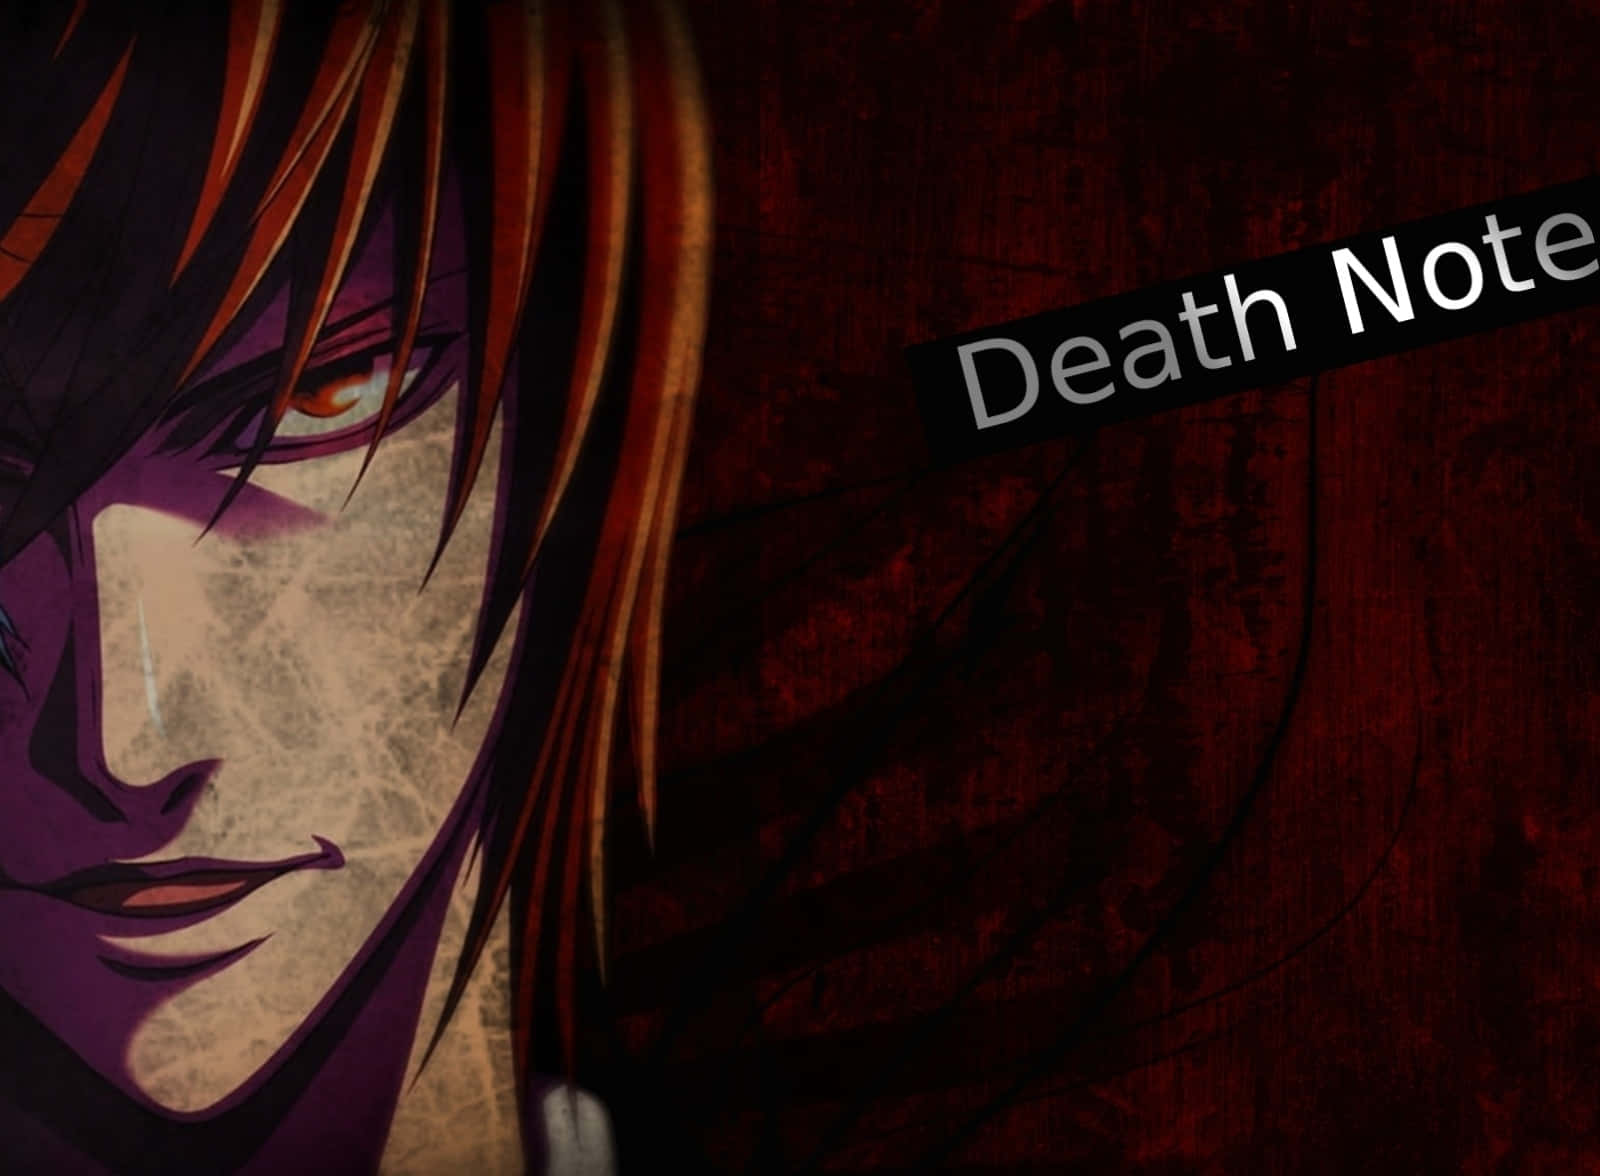 Light Yagami entering the world of Death Note